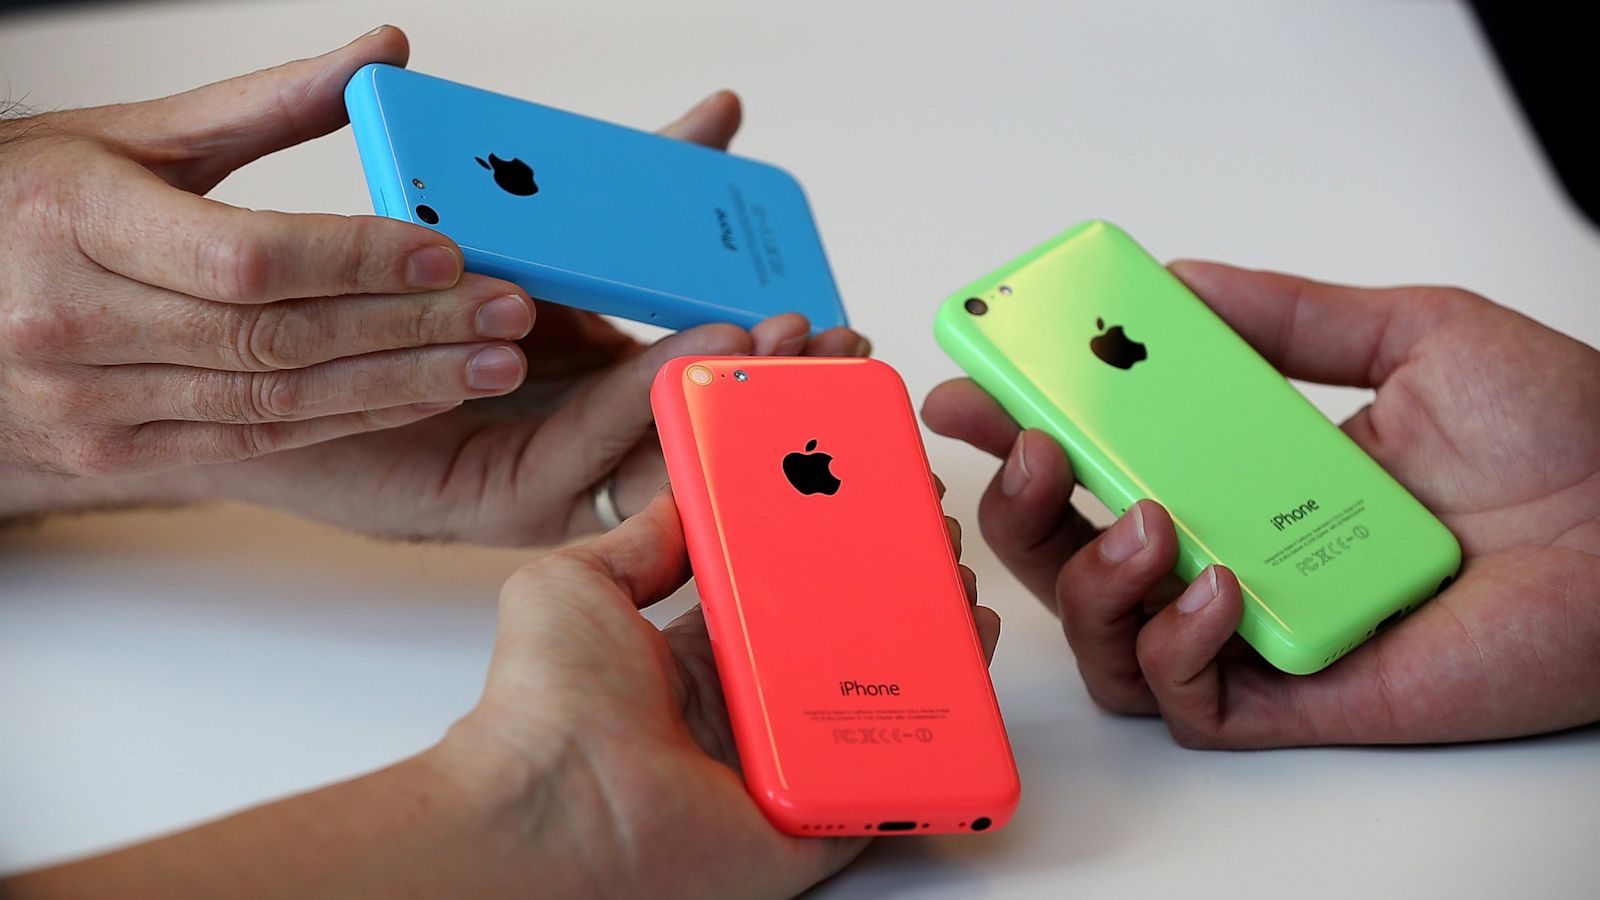 eerlijk Brig krans Two Weeks After Launch, Walmart Drops Price of the iPhone 5c to $45 After  Best Buy's Offer - ABC News